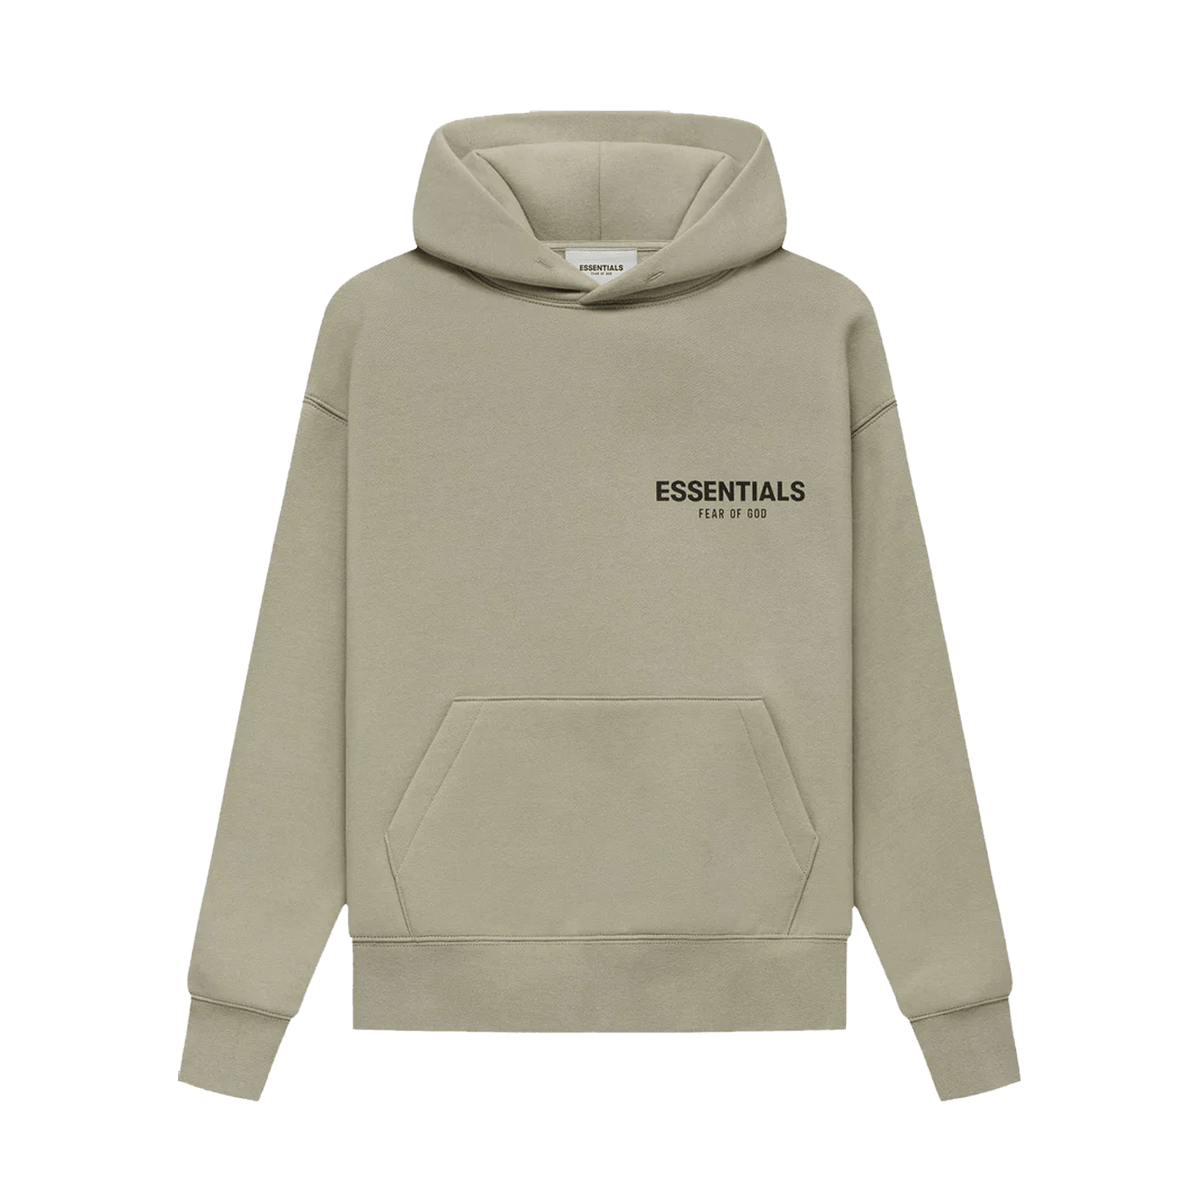 Best Style Releases This Week: Supreme Box Logo Crewnecks, Bape Heads Show  Tees, Fear of God Essentials Collection